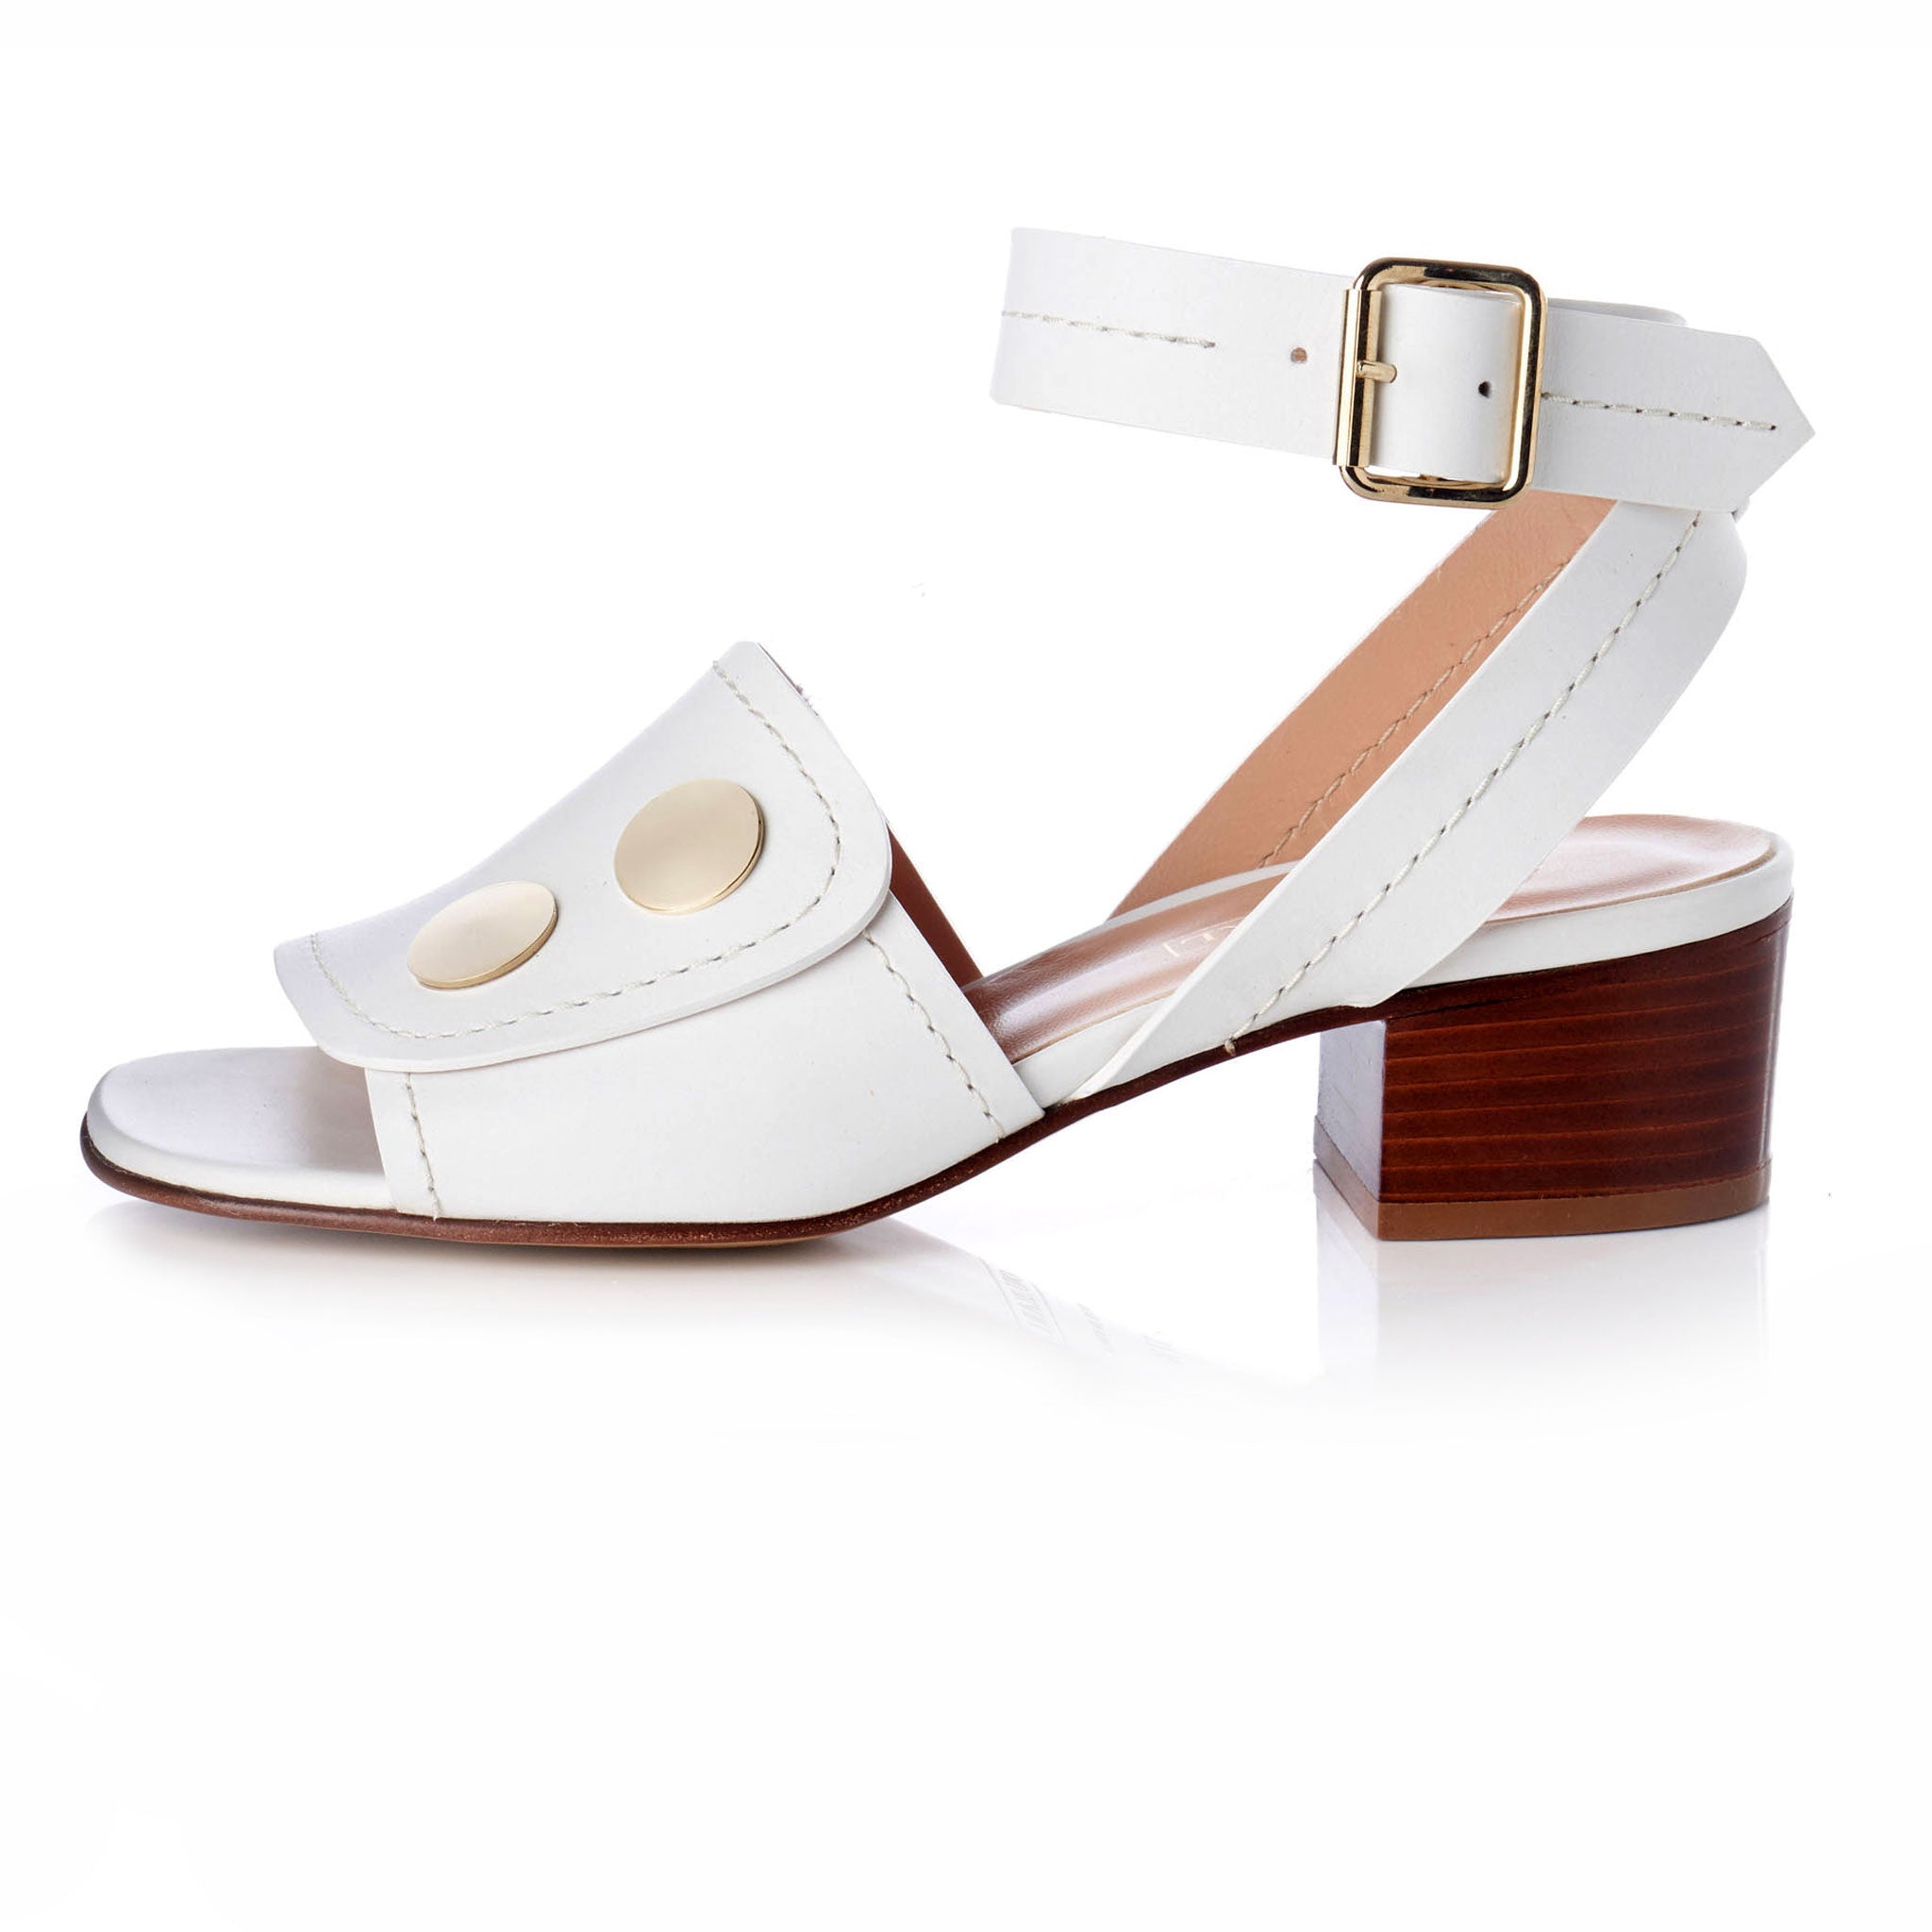 white open toe sandals with ankle strap and gold buckle detail. round oversized metal flat studs at vamp with brown stacked wood heel.